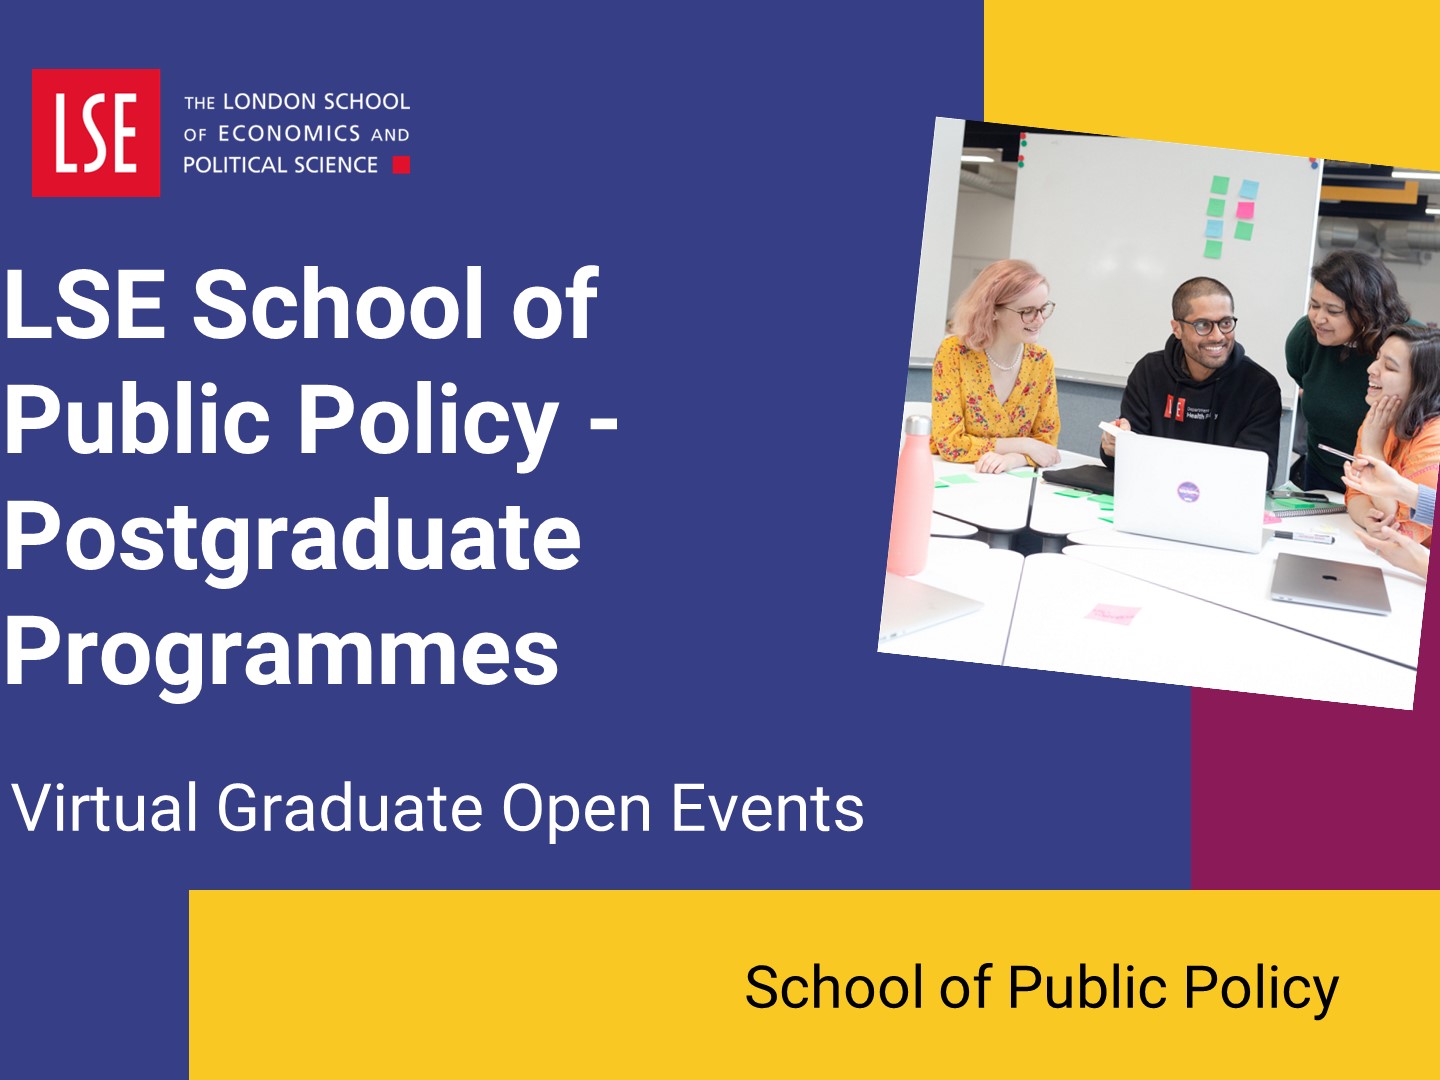 Introduction to LSE's School of Public Policy - Postgraduate Programmes